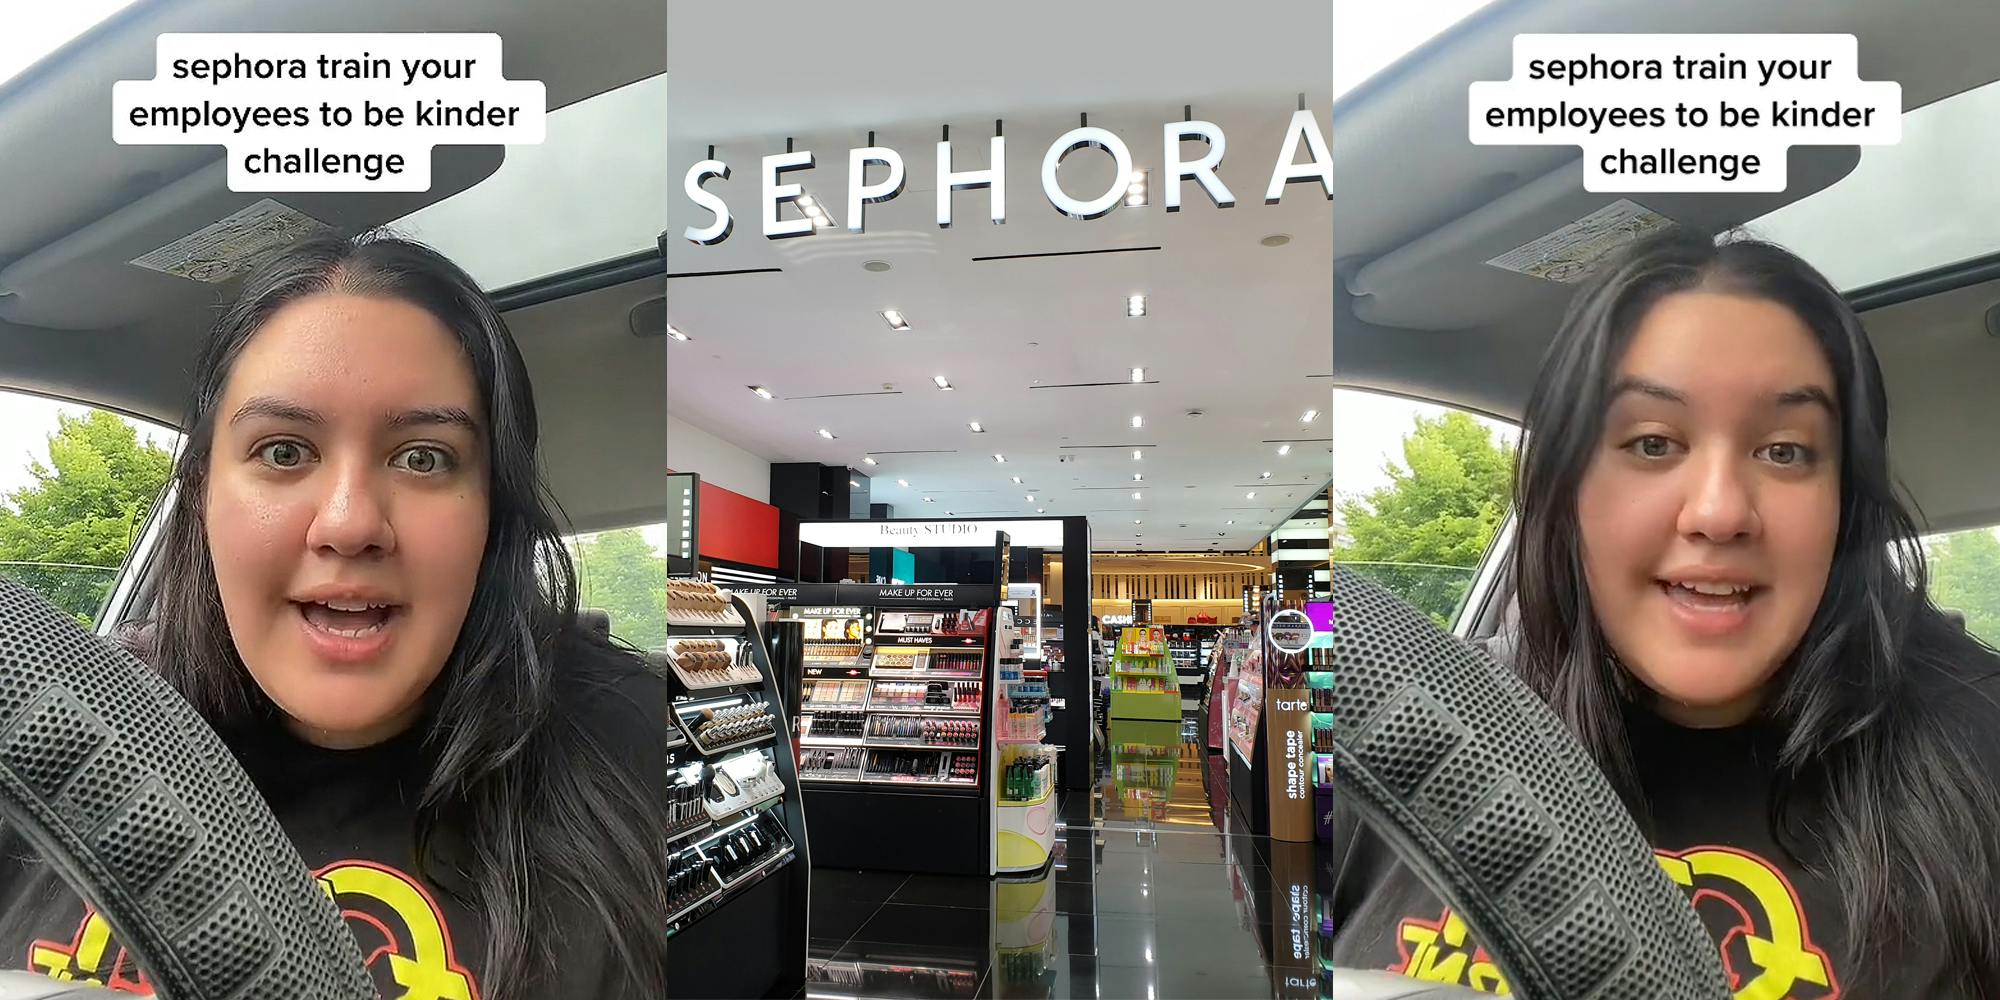 woman speaking in car caption "sephora train your employees to be kinder challenge" (l) Sephora interior with "SEPHORA" sign (c) woman speaking in car caption "sephora train your employees to be kinder challenge" (r)